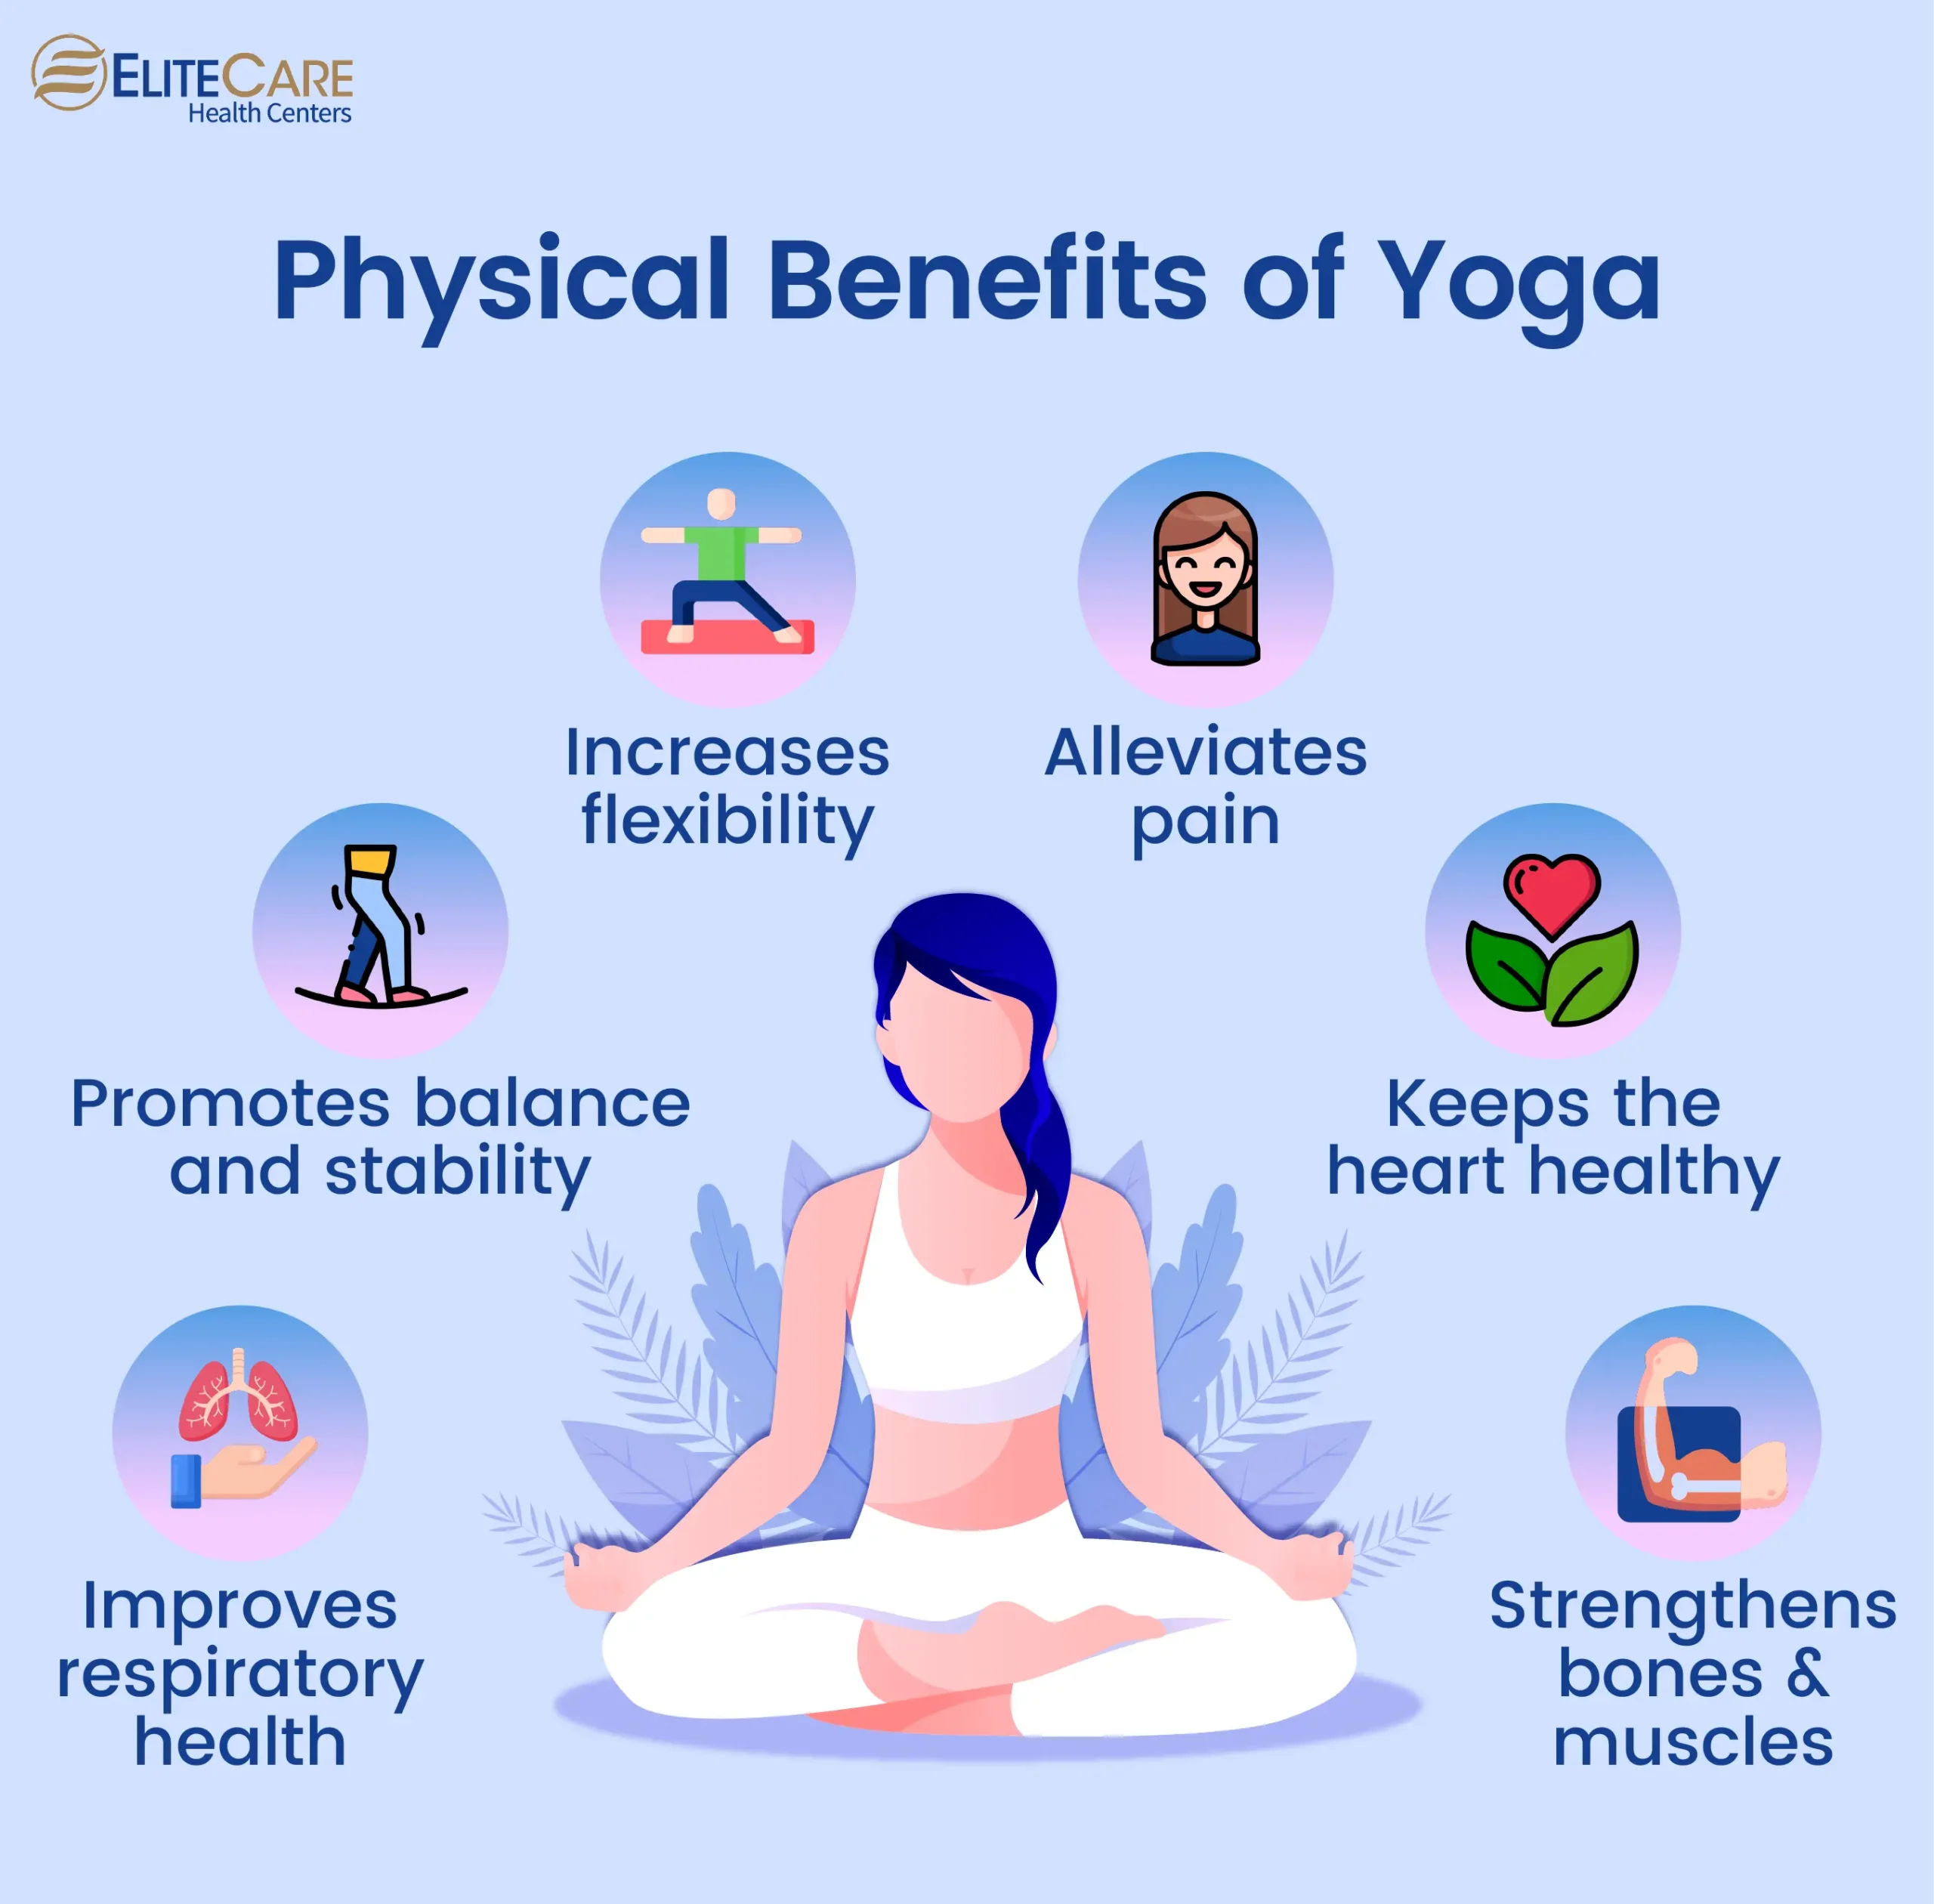 who can practice yoga - Can anyone start yoga